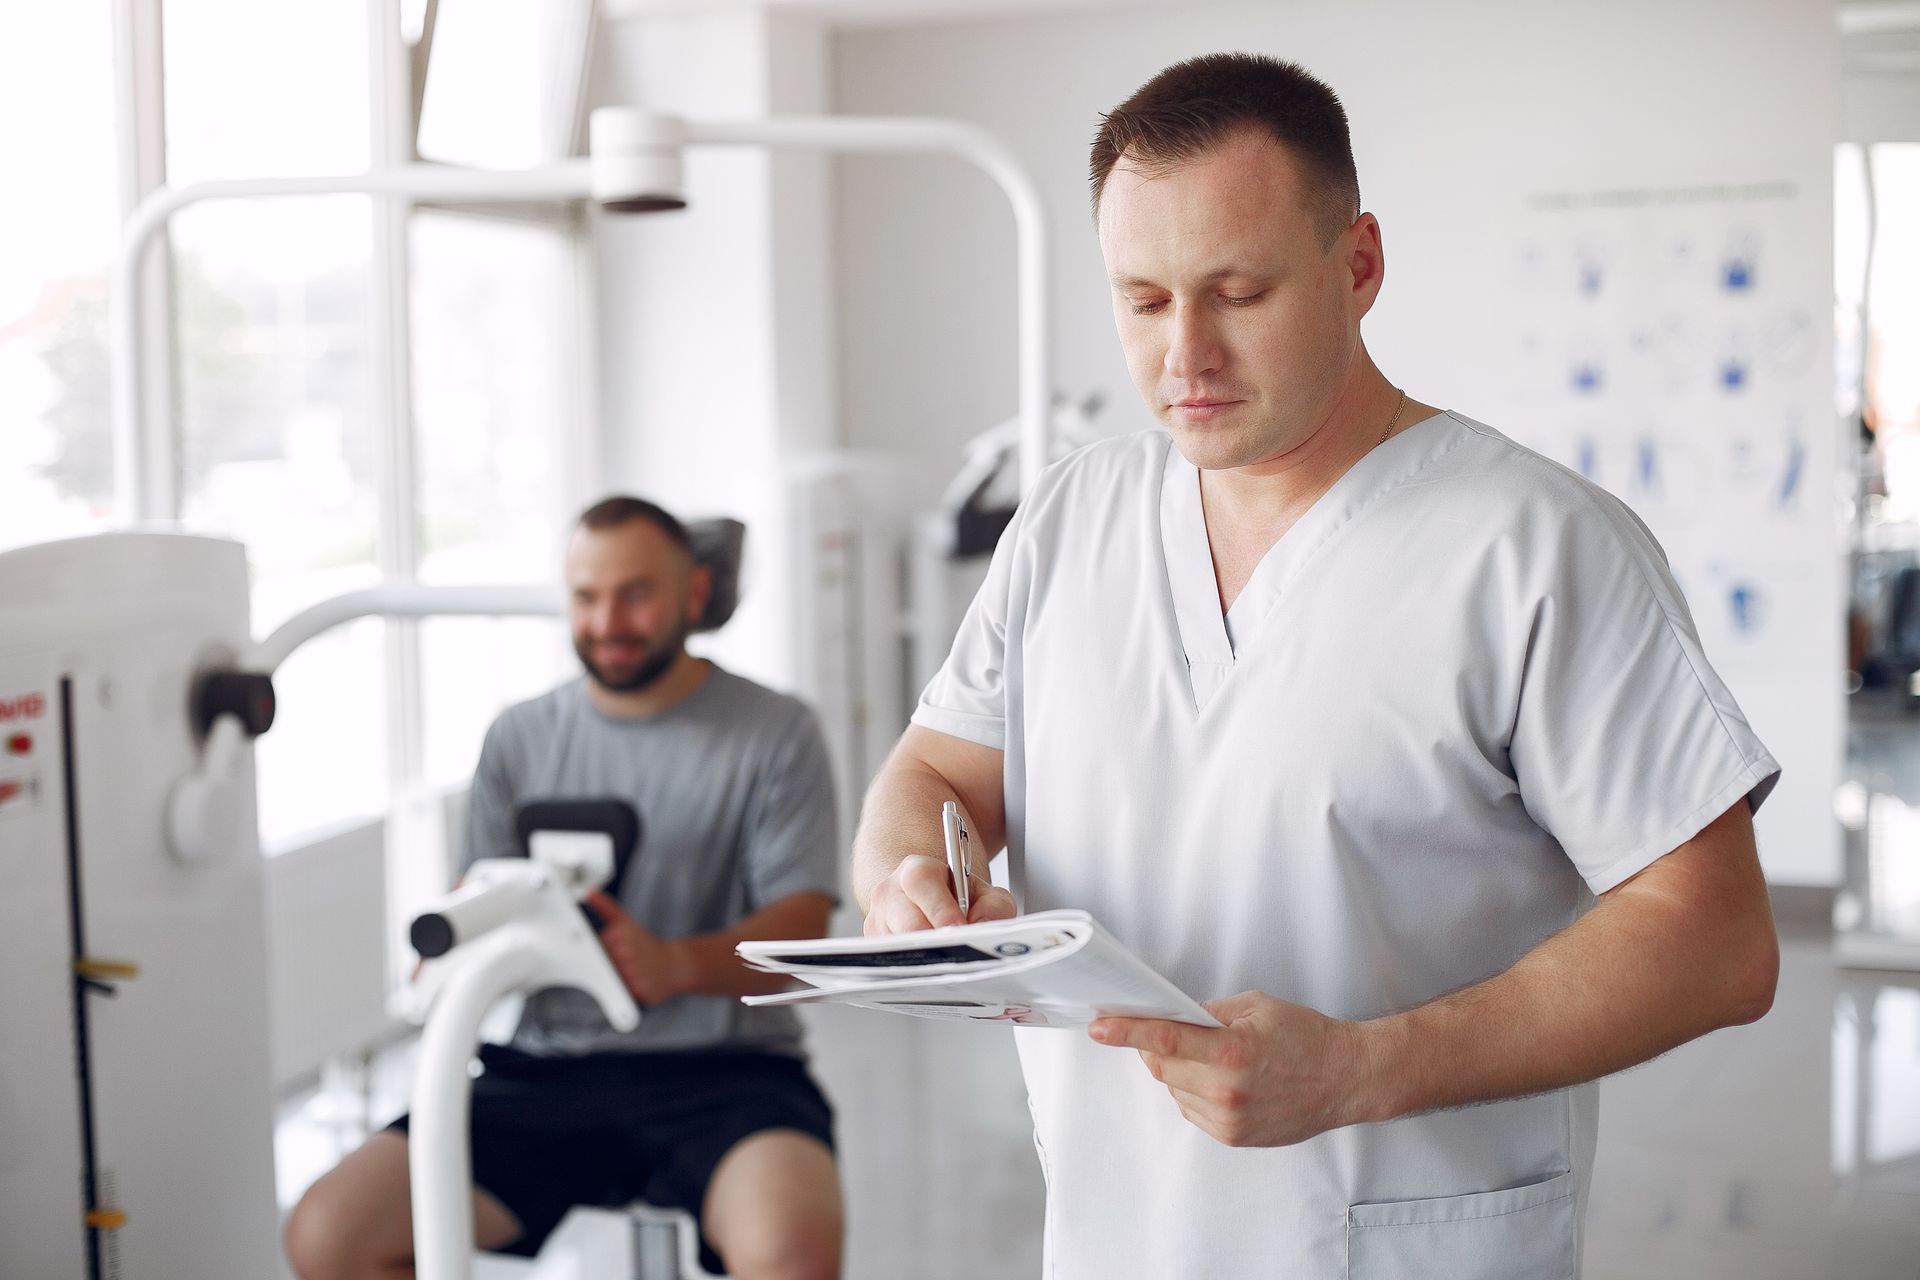 a man is riding a bike while a doctor writes on a clipboard